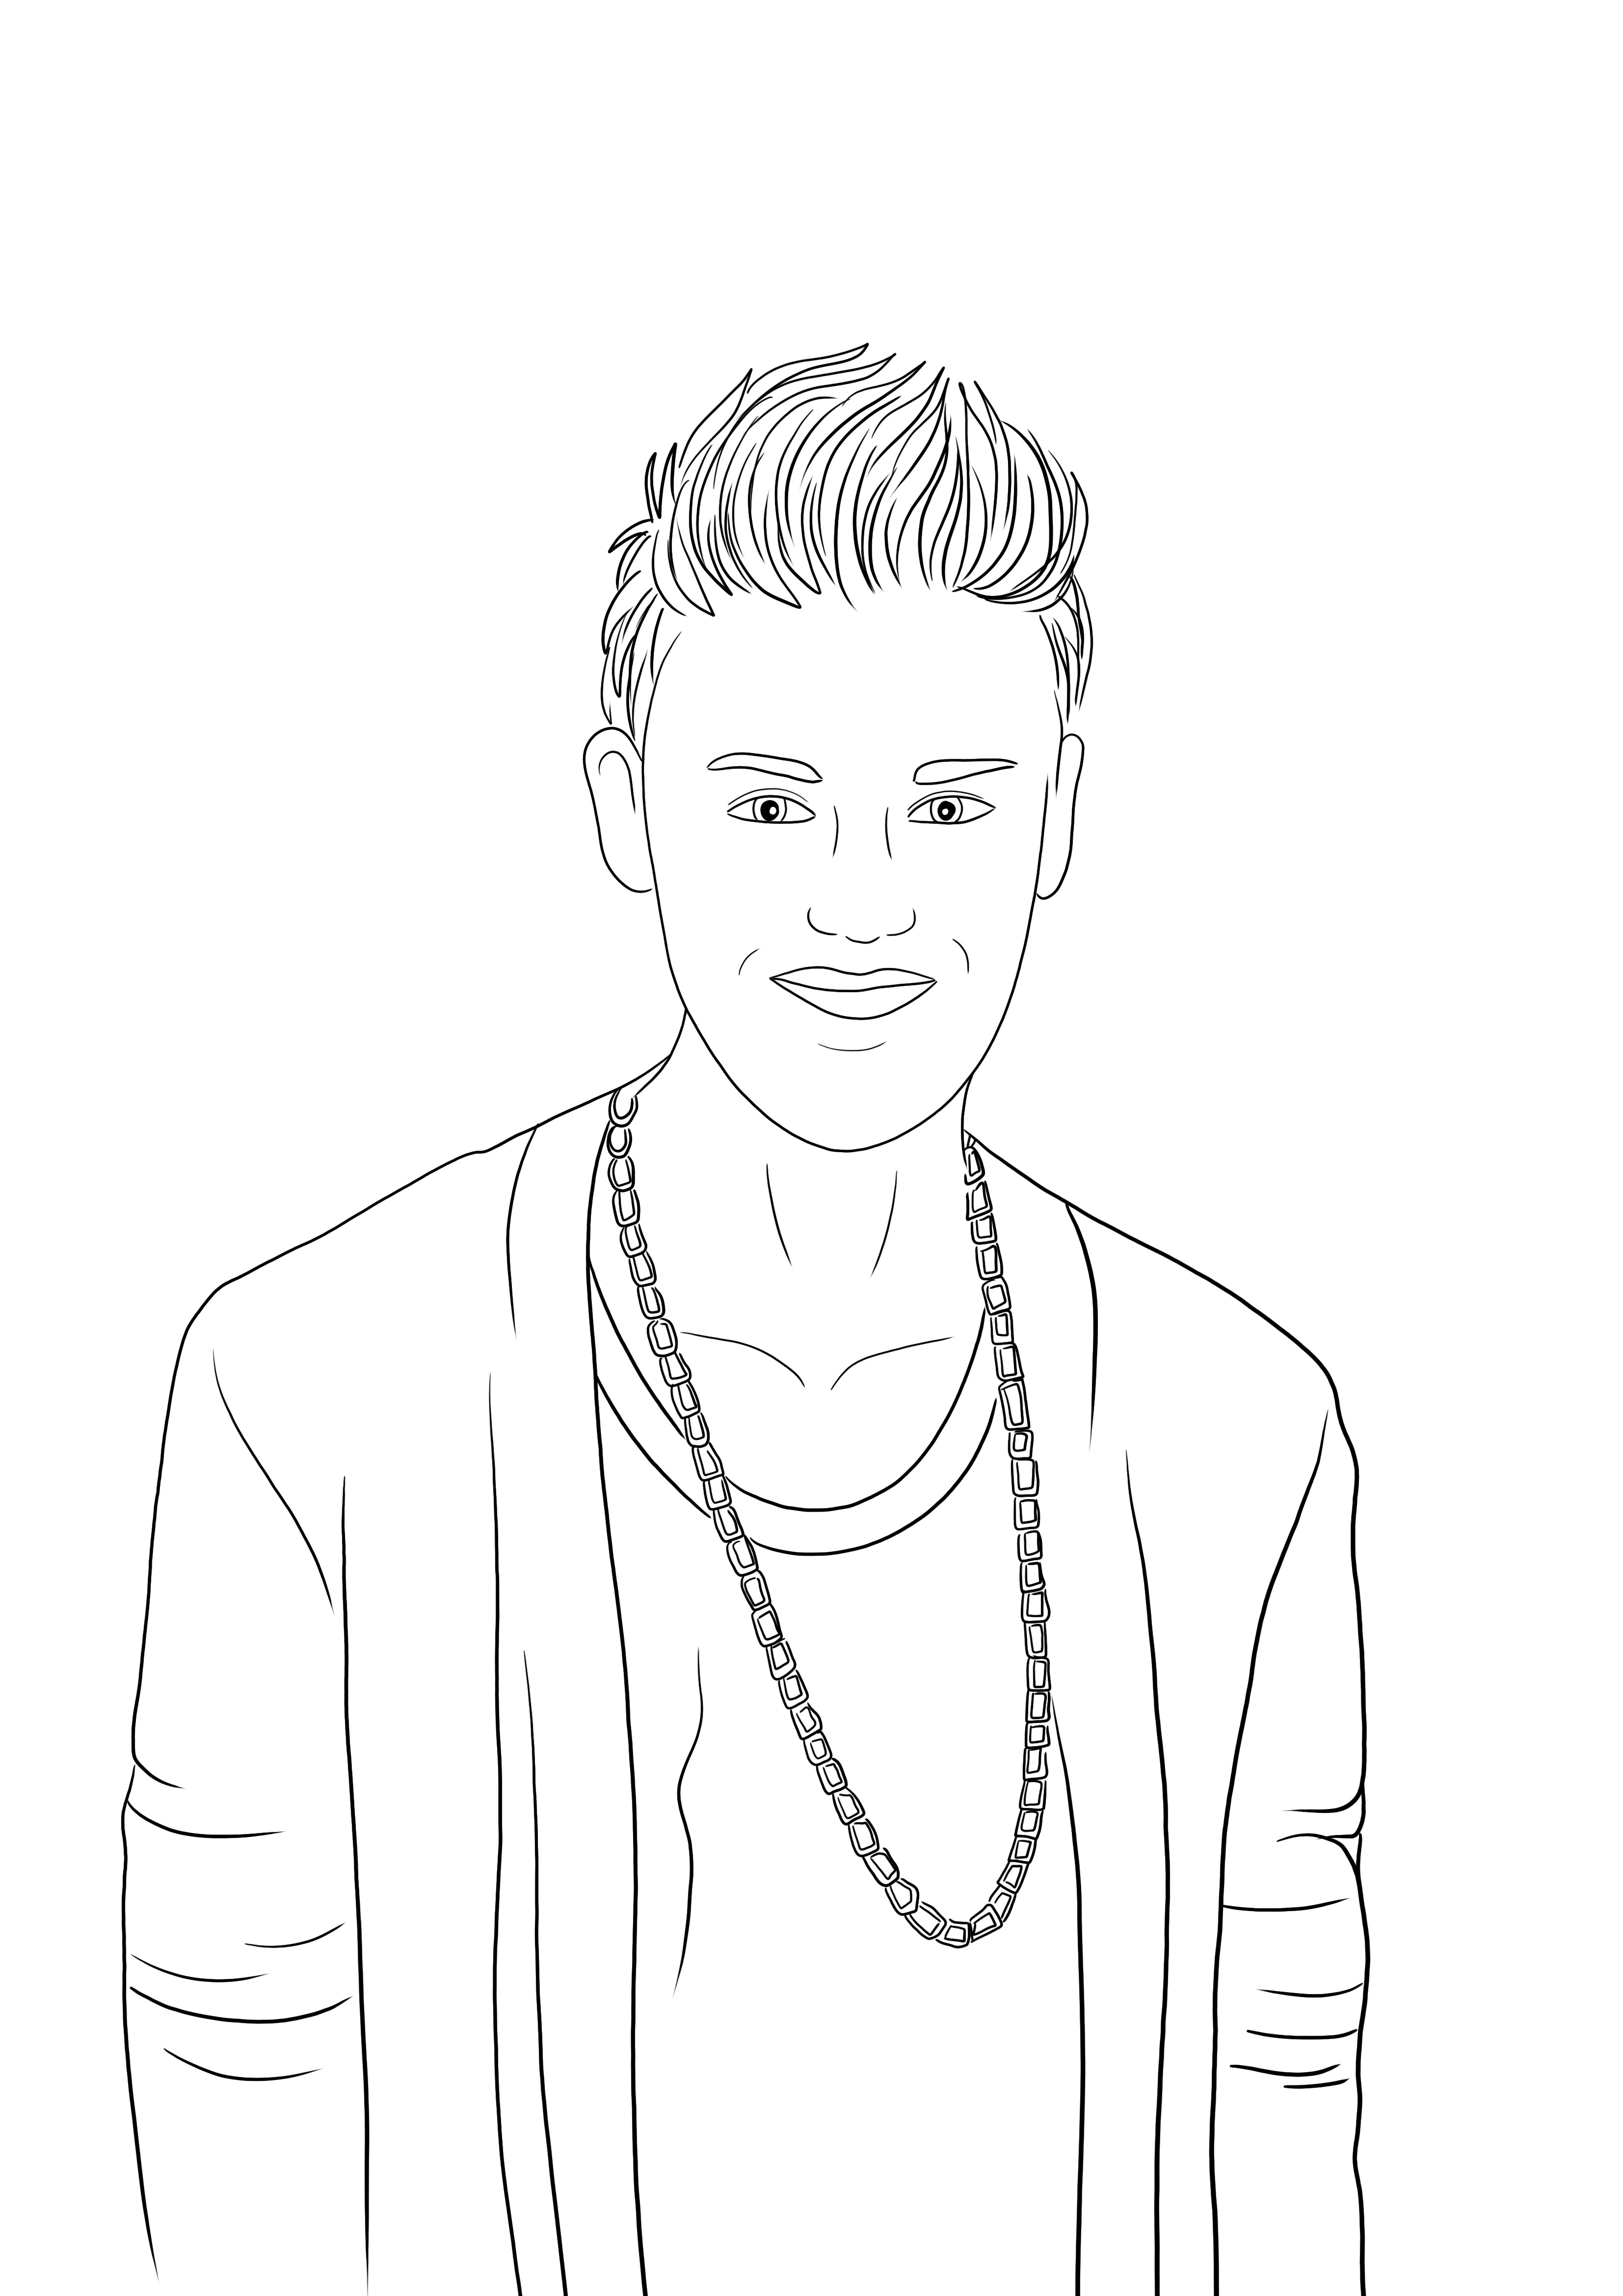 Justin Bieber for coloring for free and learning about famous pop stars